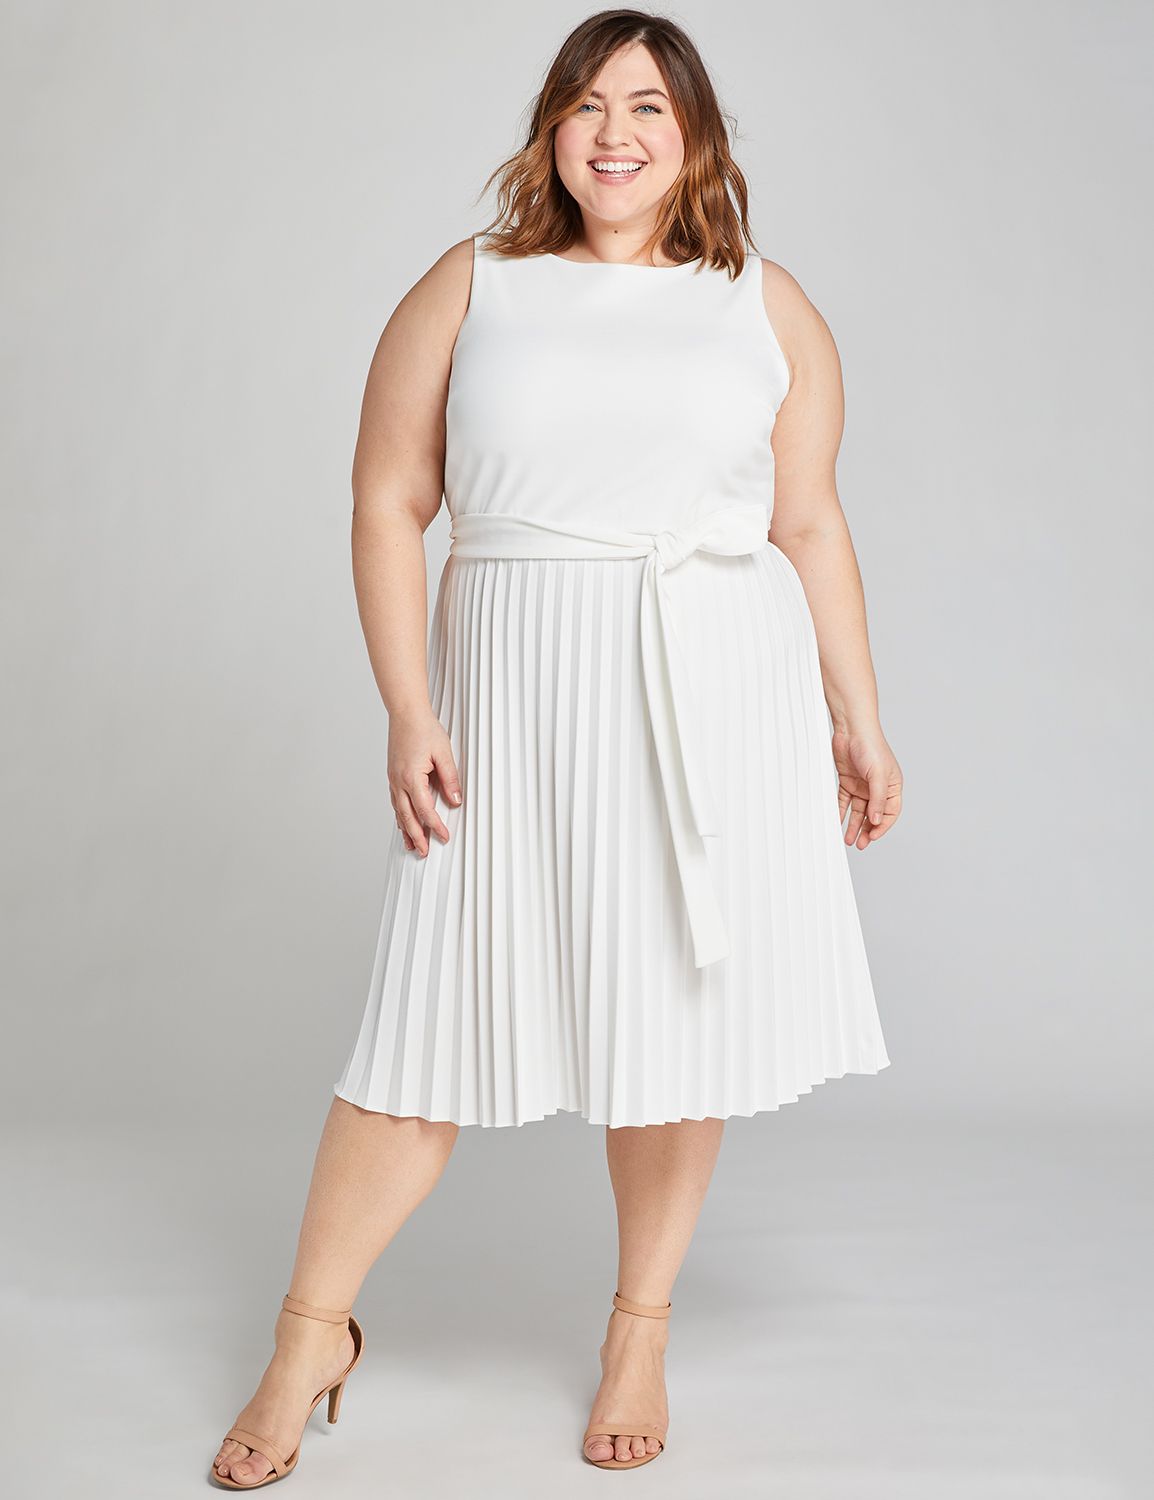 lane bryant fit and flare dress